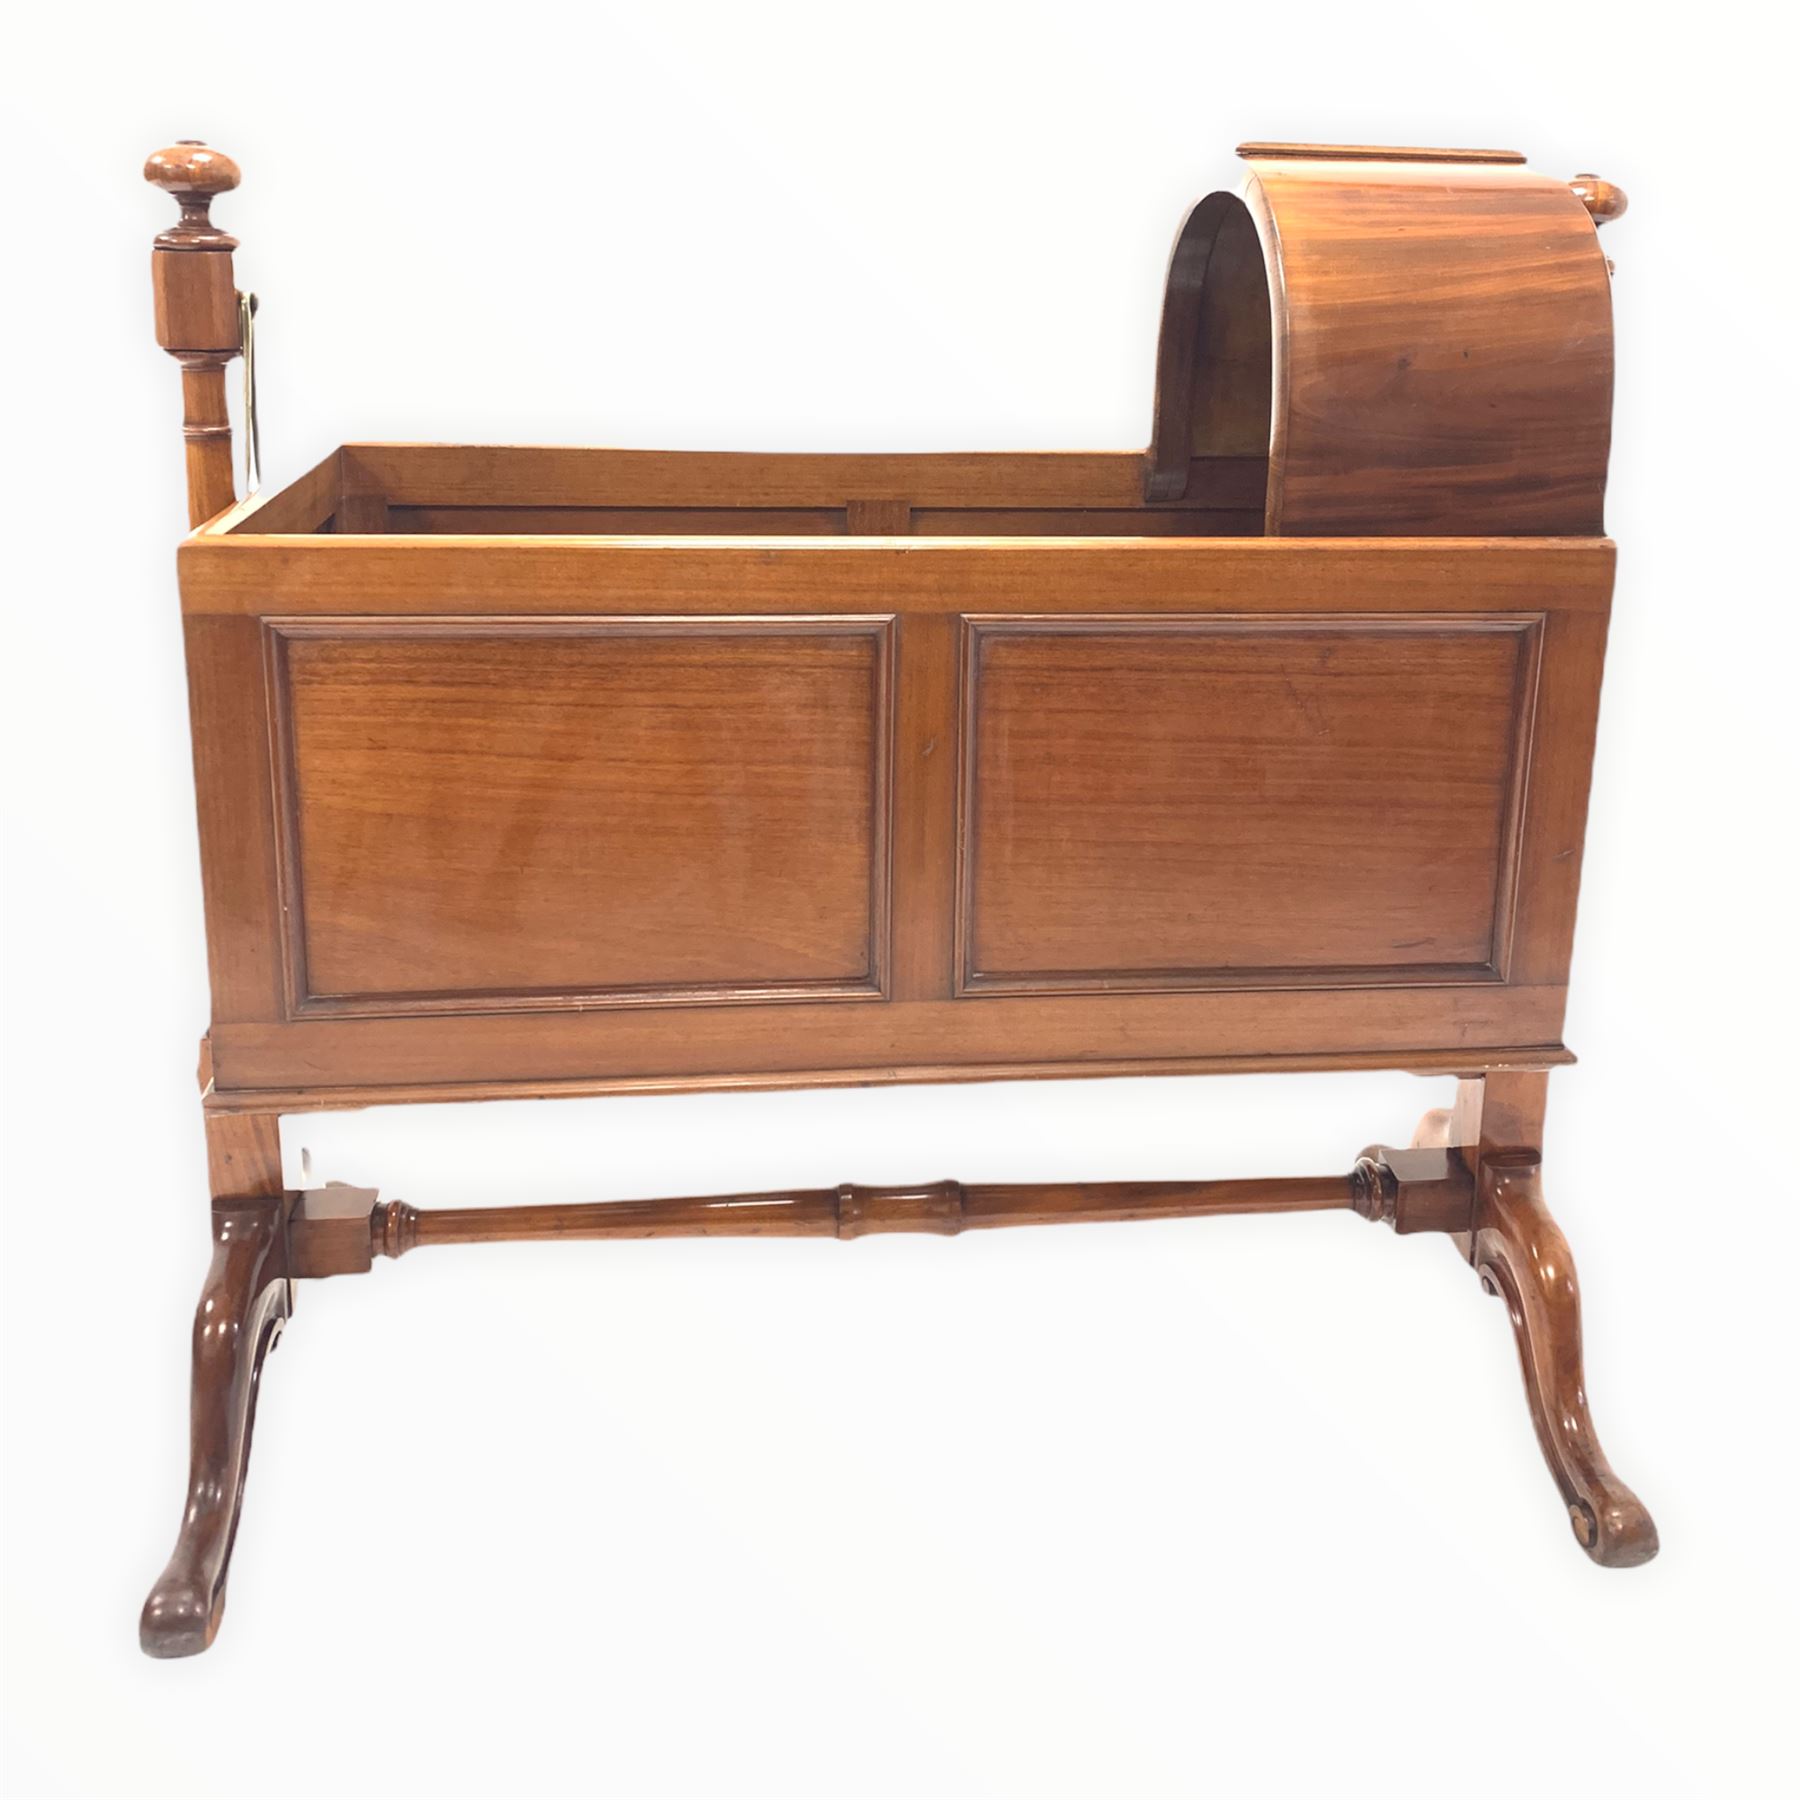 Victorian mahogany cradle on stand - Image 2 of 2